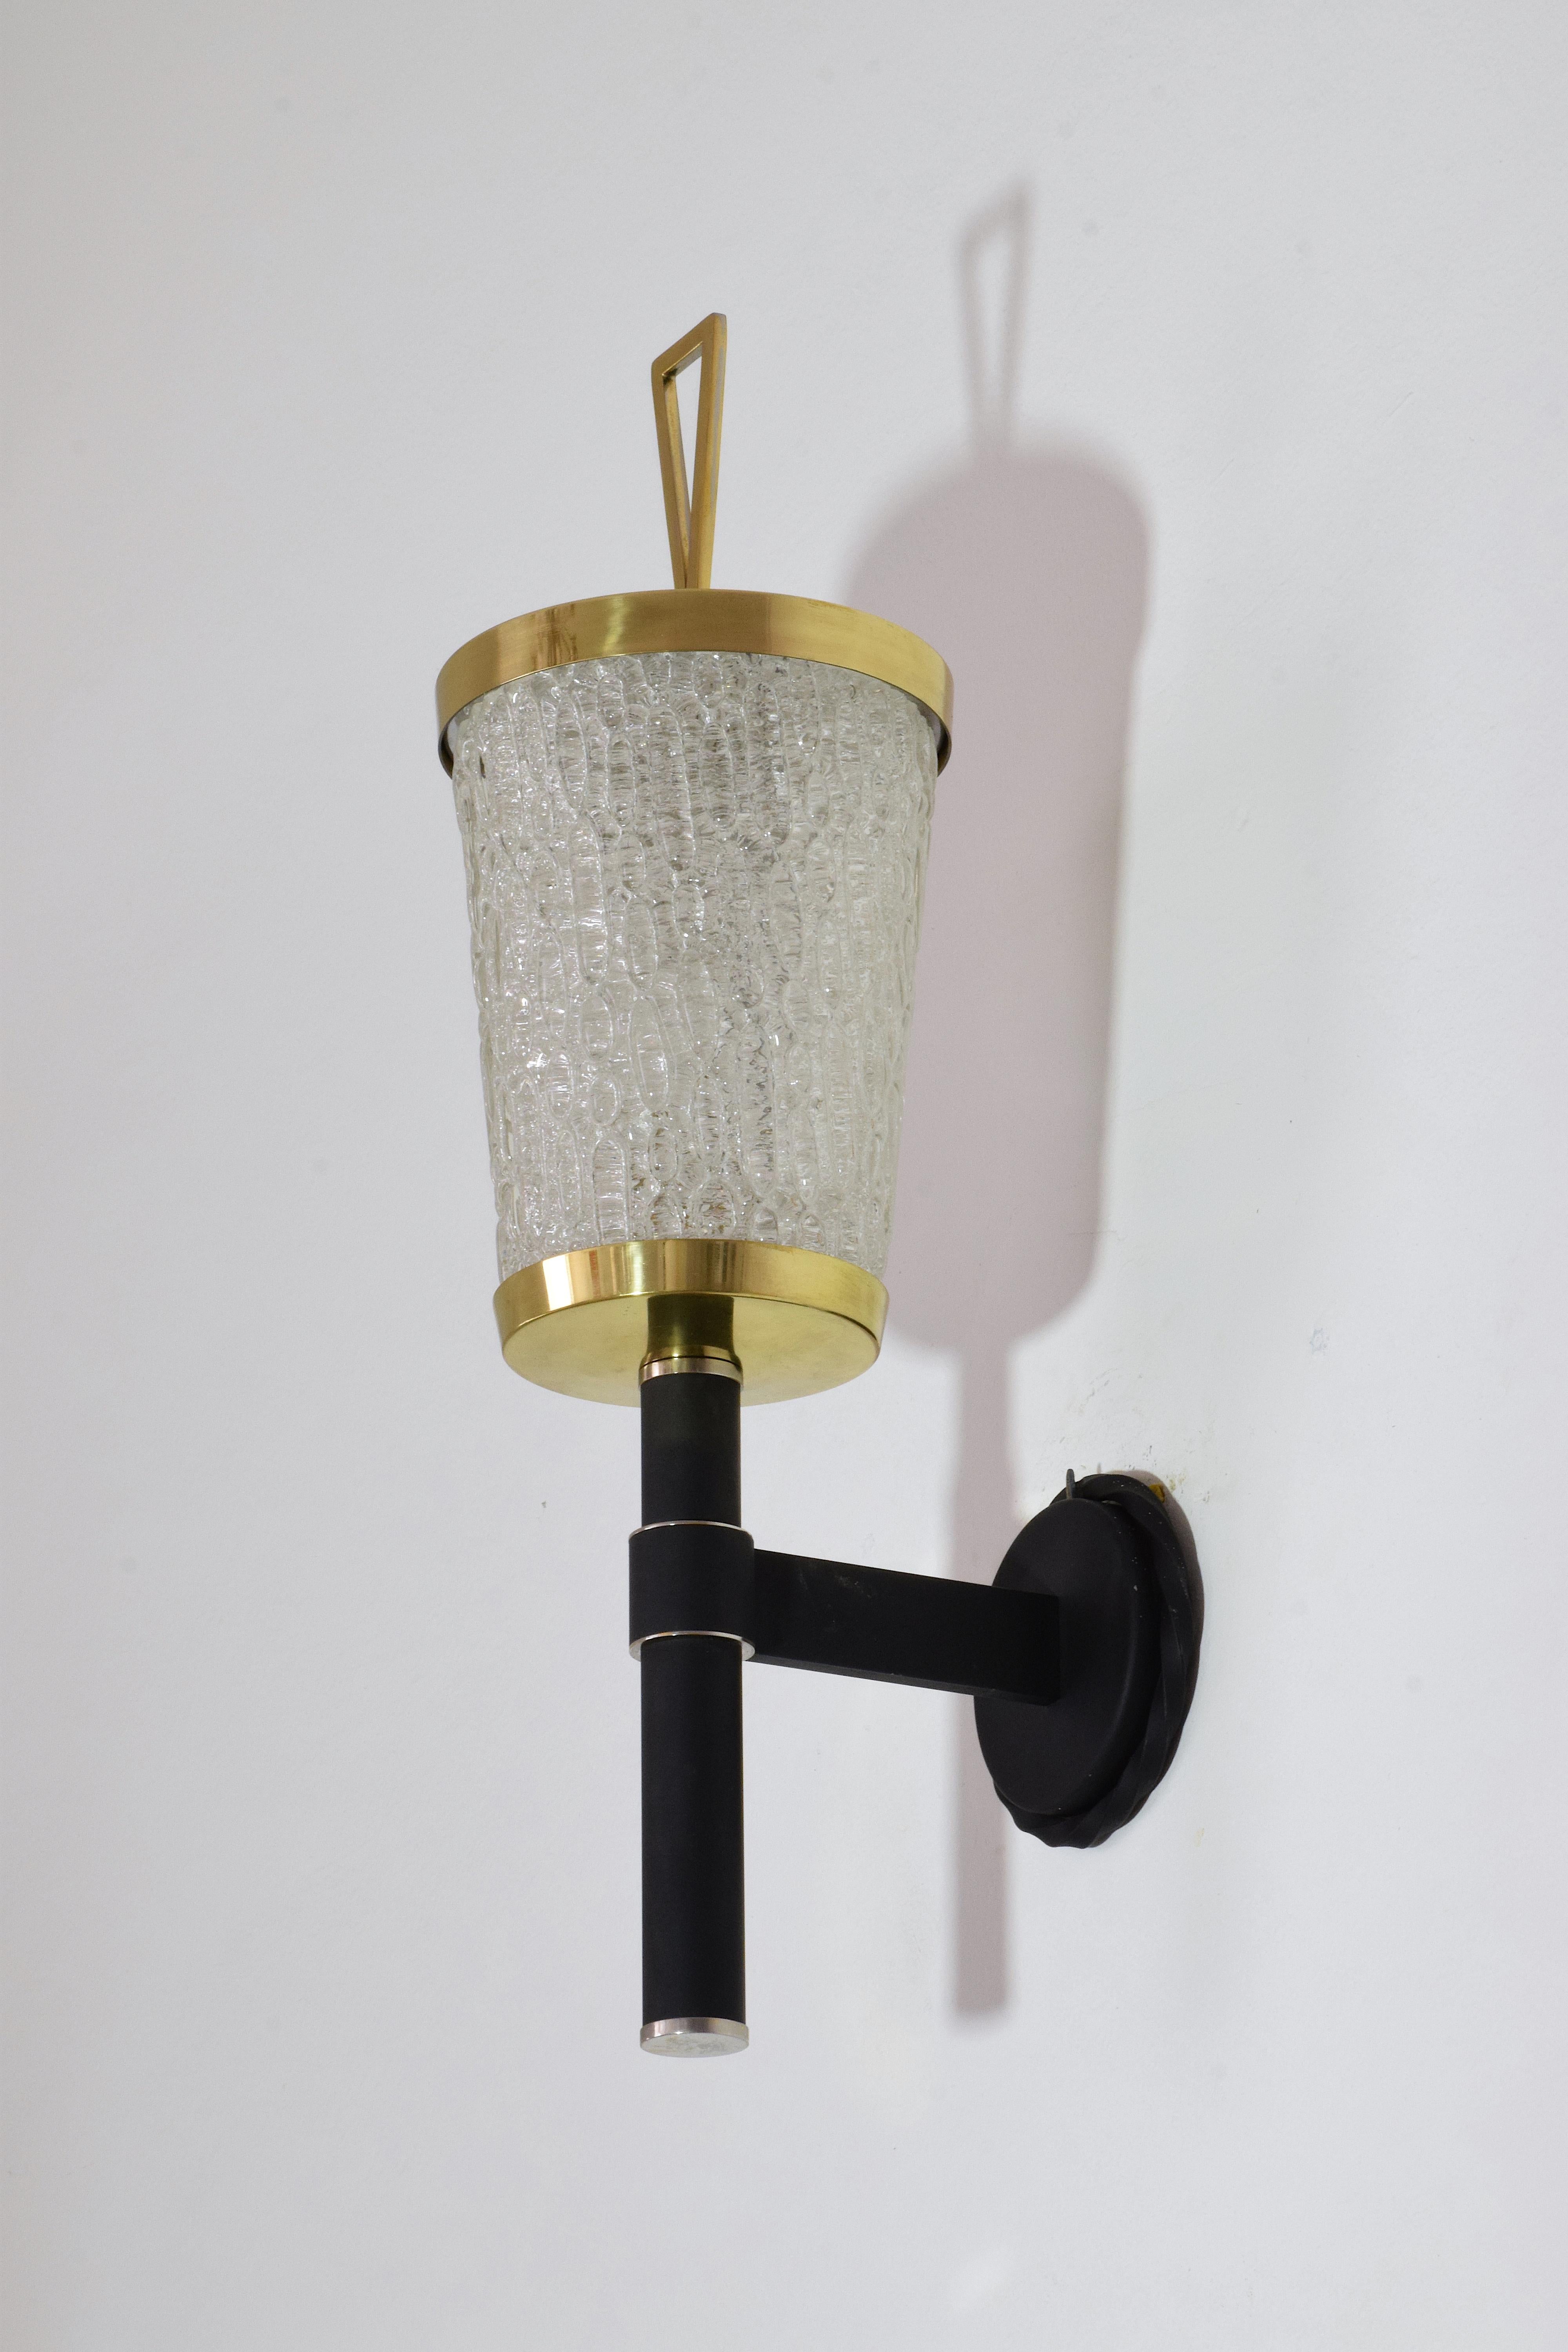 A 20th Century vintage sconce or wall light by French lighting manufacturer DLG Arlus, circa 1050s designed with textured glass, polished gold brass details and a black structure.
France, circa 1950s.